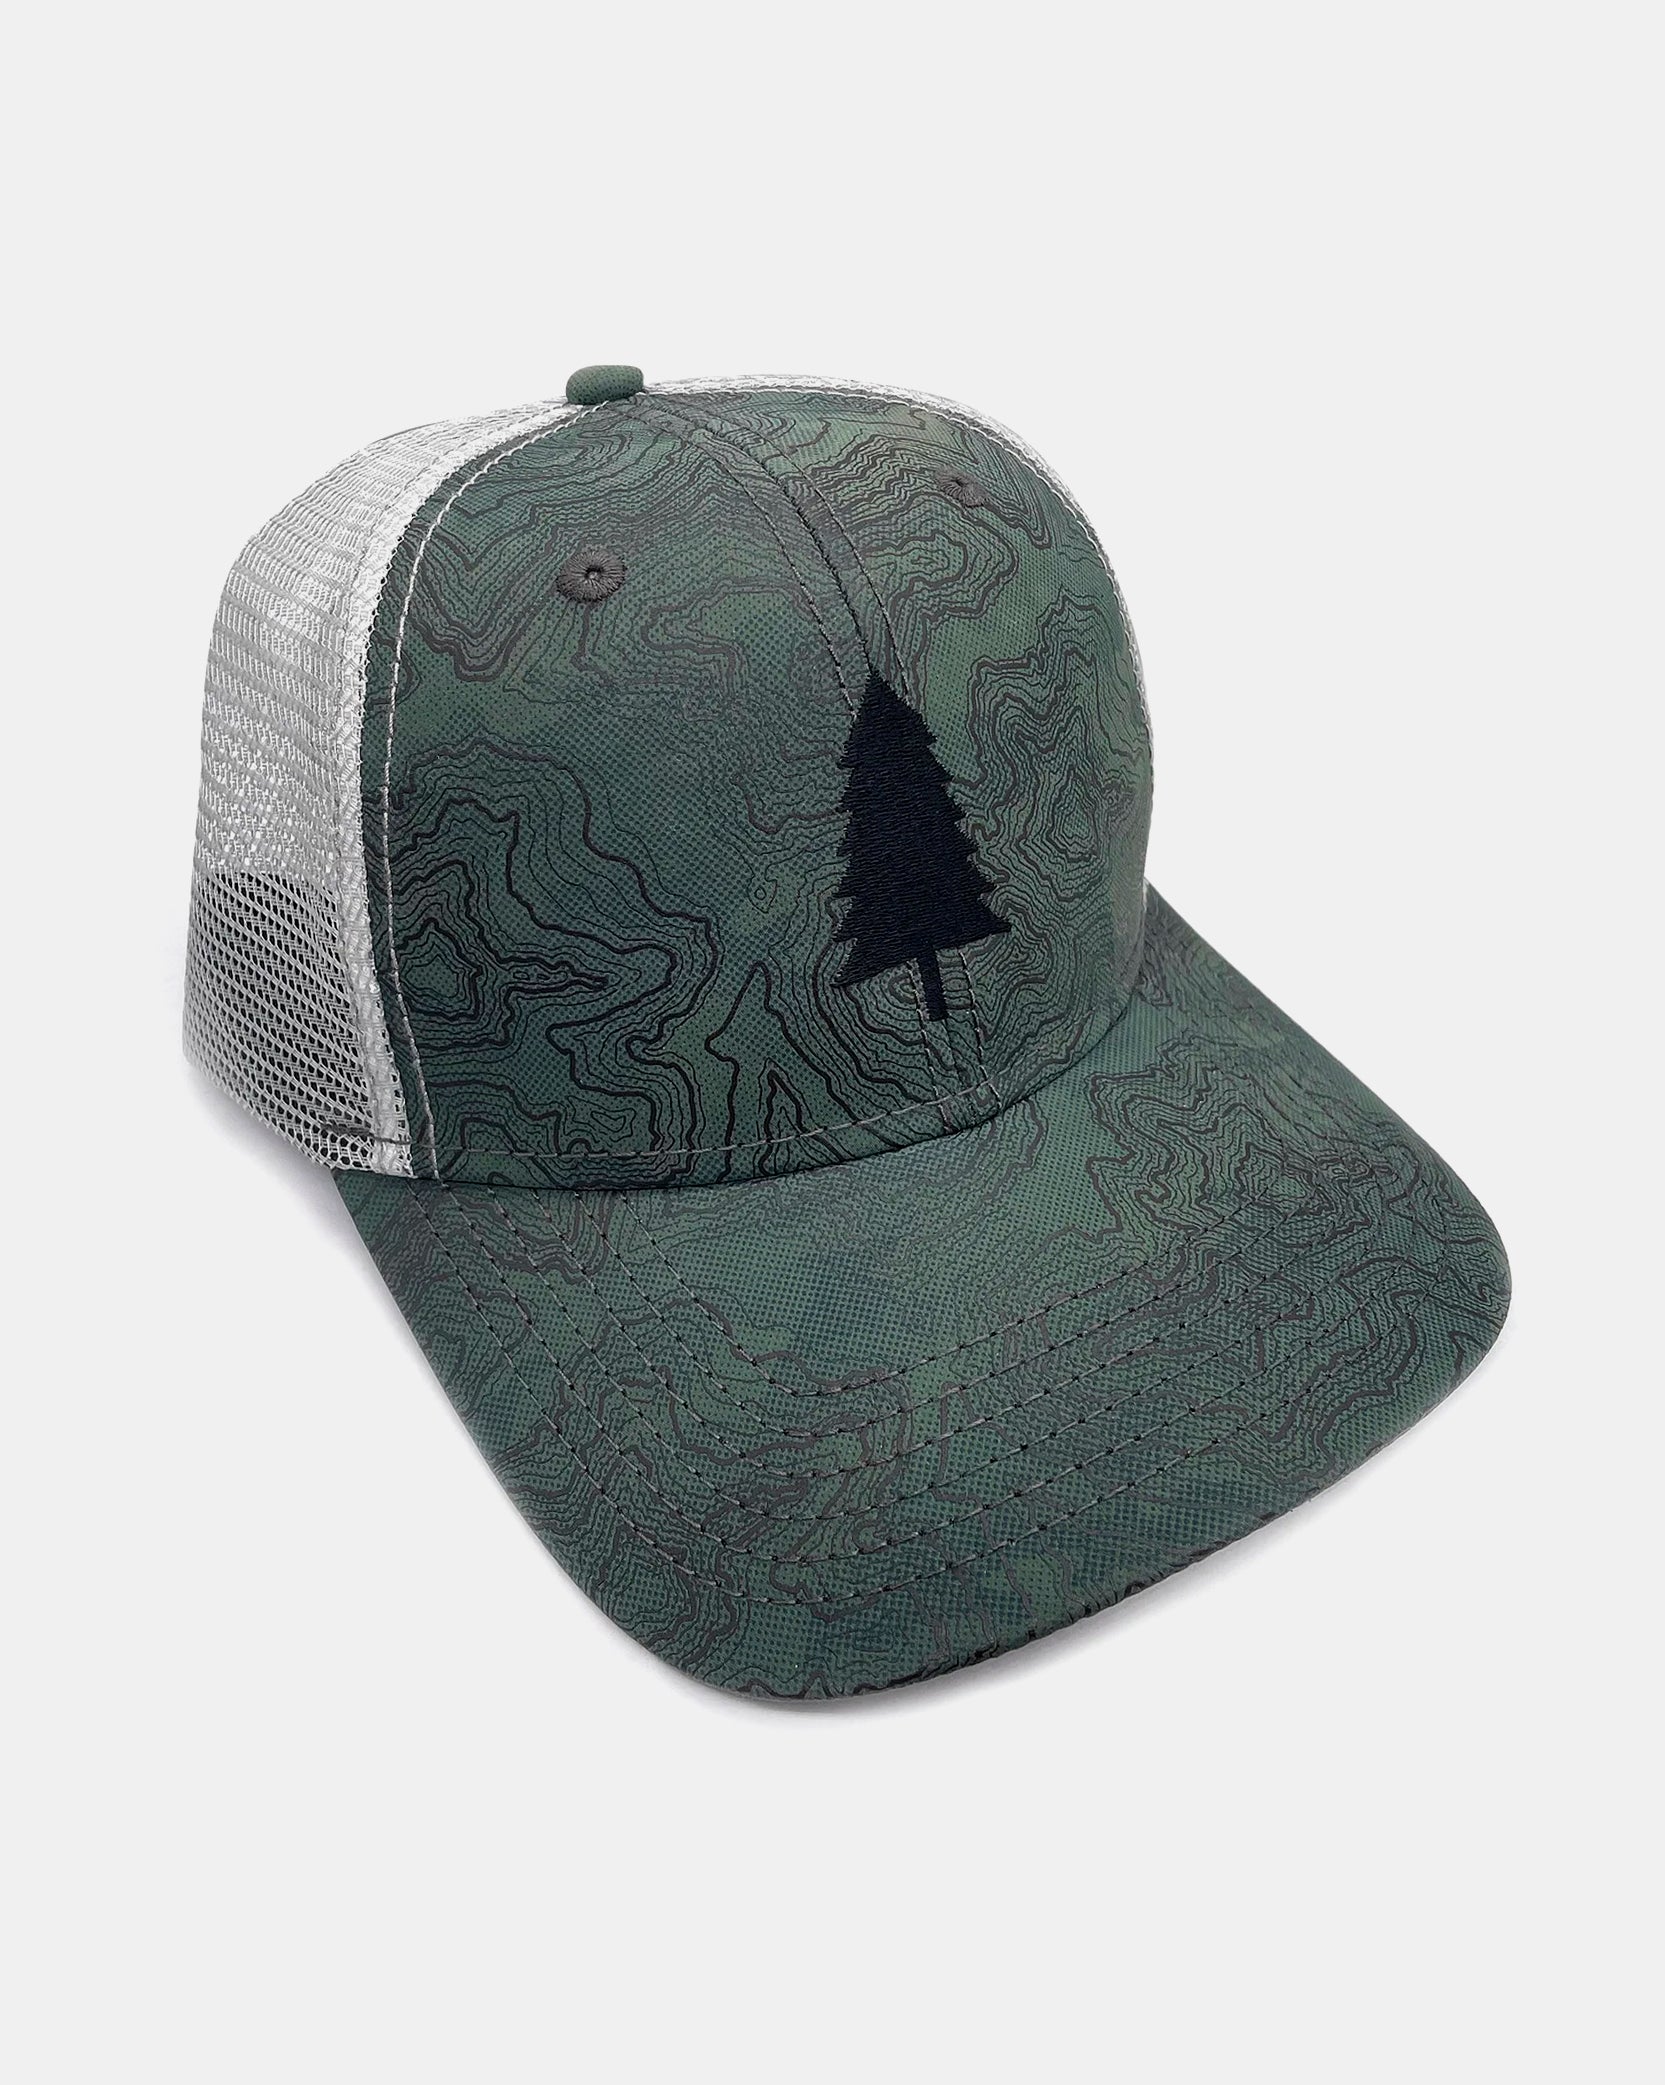 Topography and Trees Trucker Cap 1